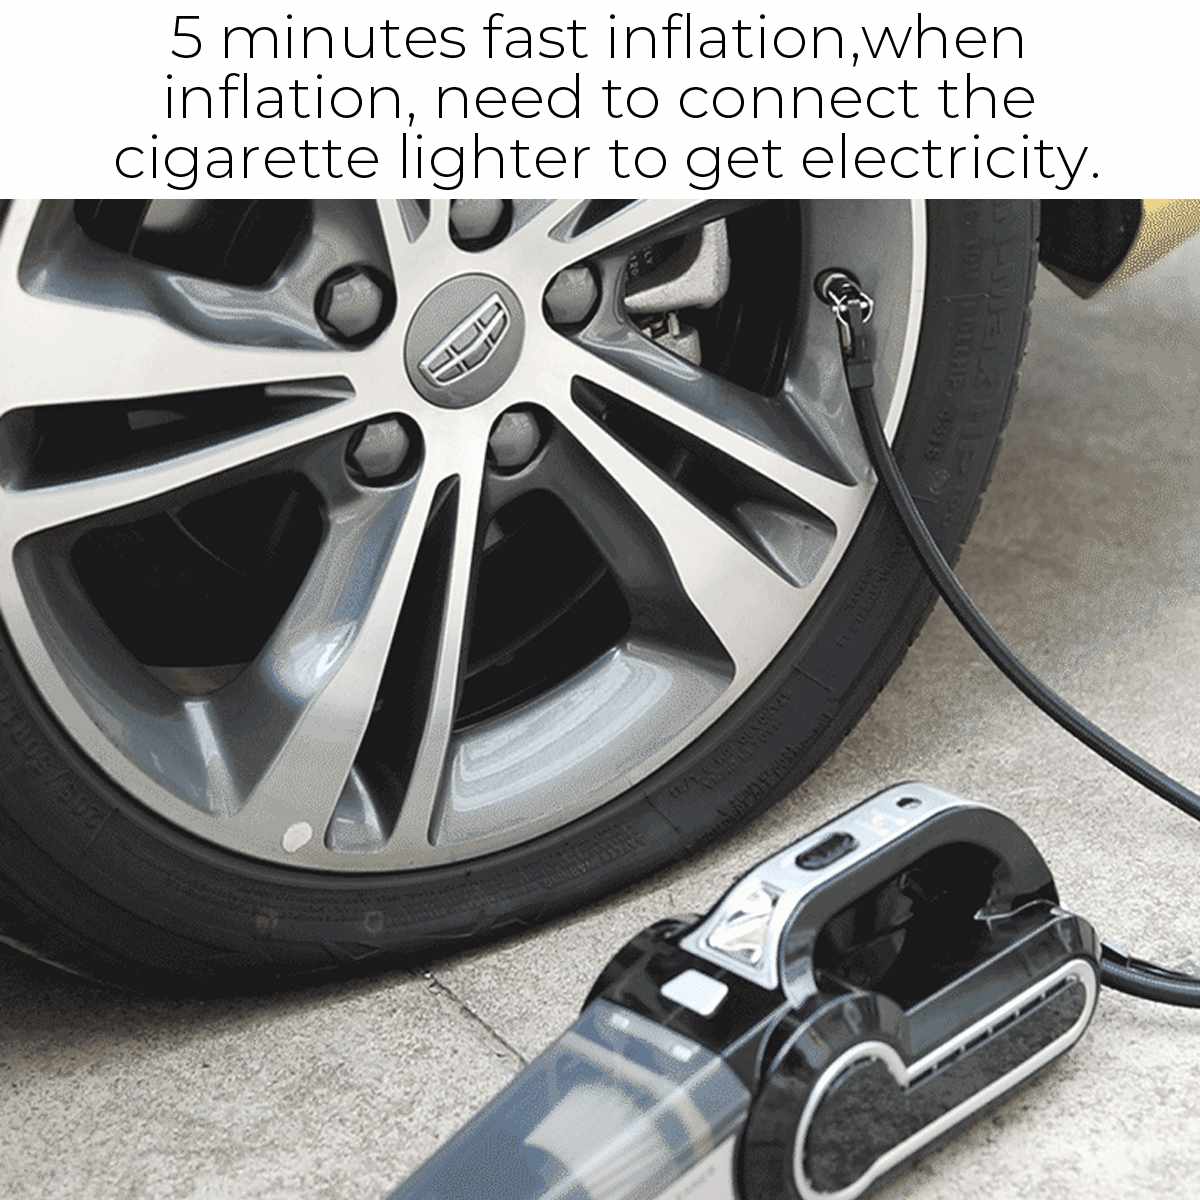 4 in 1 Portable Car Vacuum Cleaner Mini Handheld Air Compressor 120W 4000pa Wet/Dry Auto Vacuums Cleaner For Home Vehicles